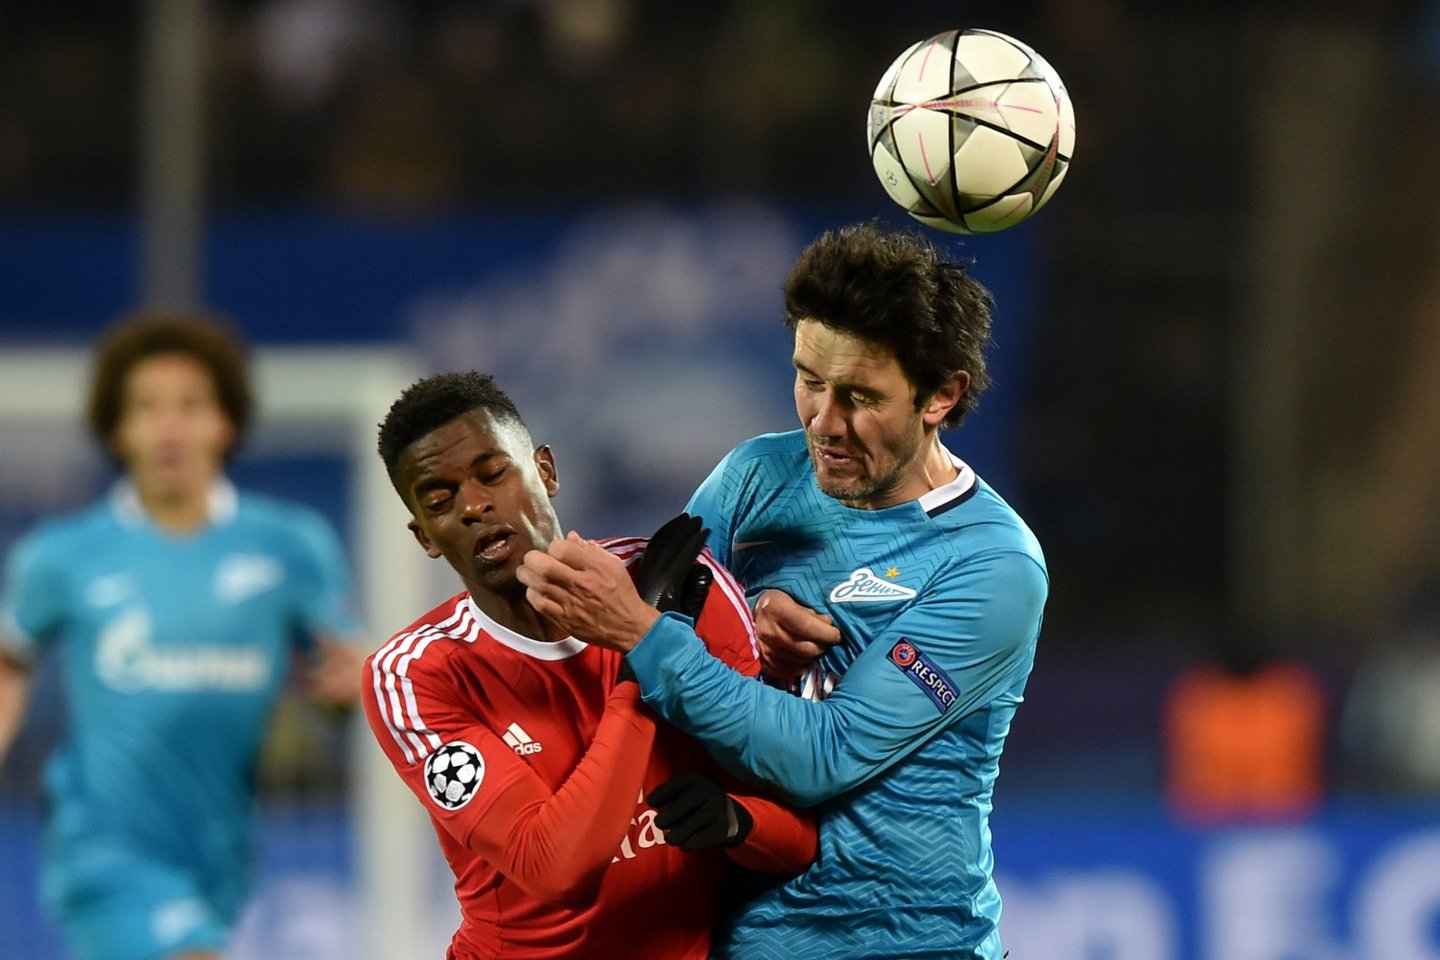 Benfica's defender Nelson Semedo (L) vies for the ball with Zenit's midfielder Yuri Zhirkov during the second-leg round of 16 UEFA Champions League football match FC Zenit vs SL Benfica at the Petrovsky stadium in St. Petersburg on March 9, 2016. AFP PHOTO / KIRILL KUDRYAVTSEV / AFP / KIRILL KUDRYAVTSEV (Photo credit should read KIRILL KUDRYAVTSEV/AFP/Getty Images)